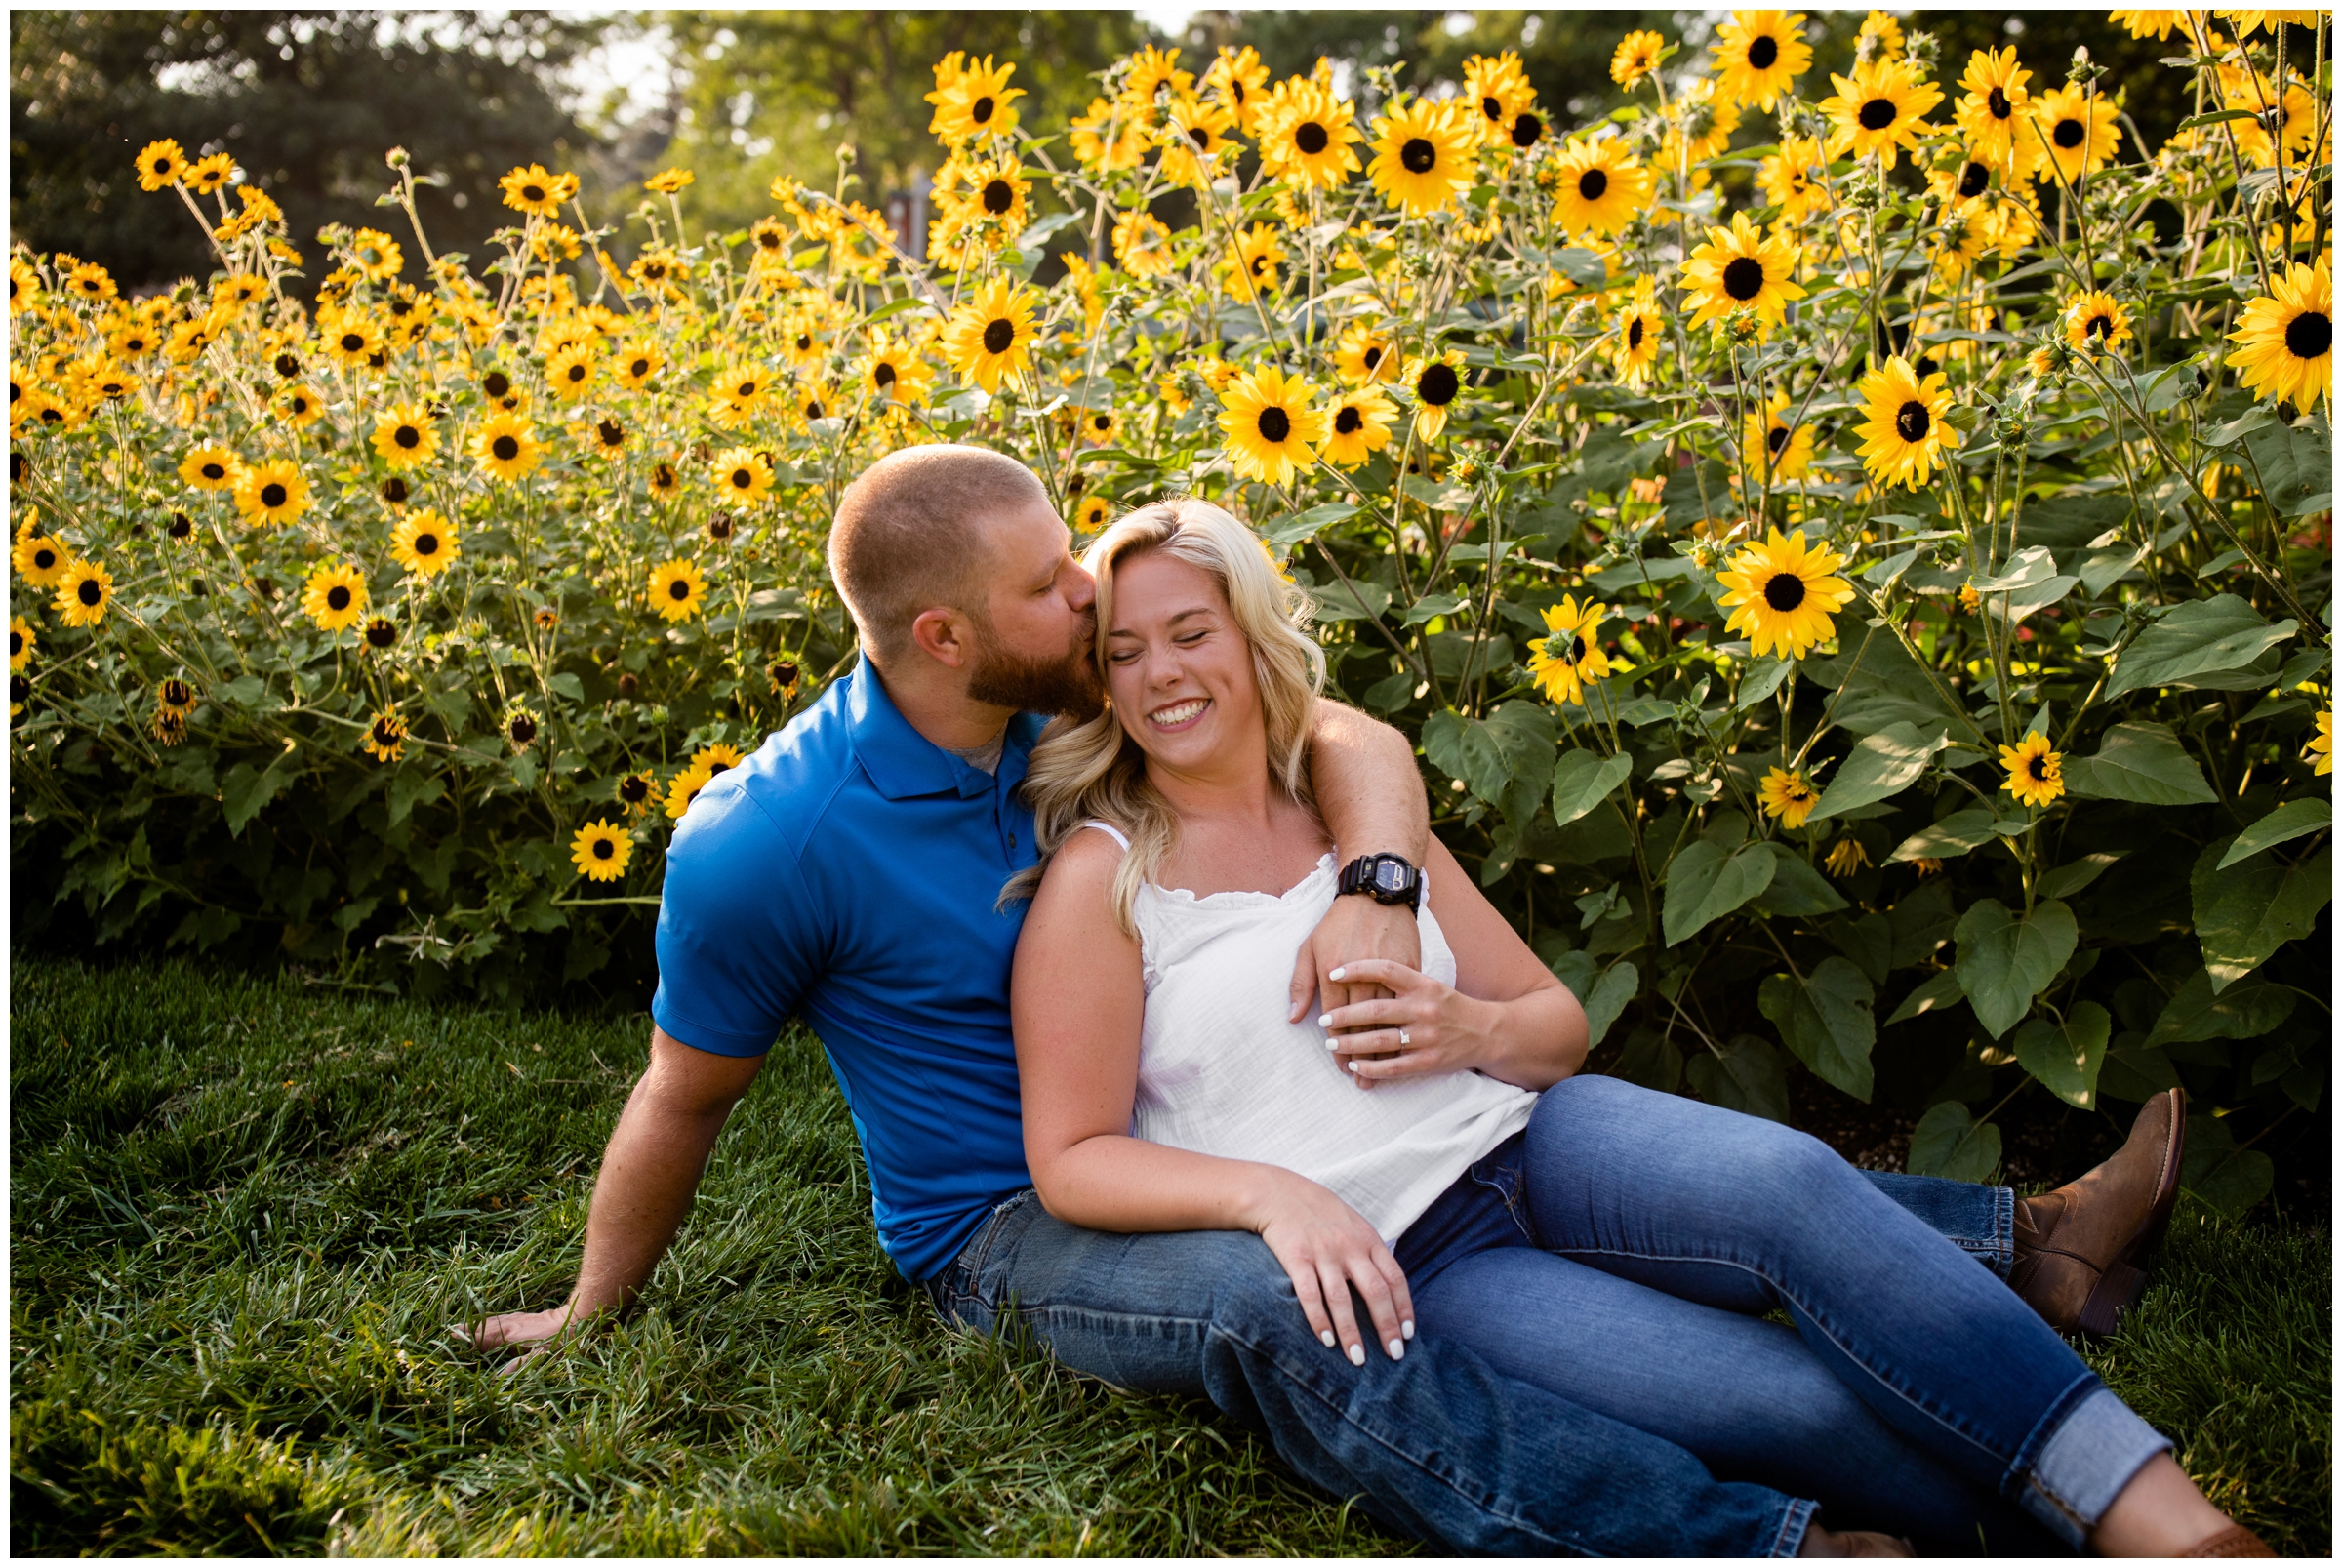 couple photography session at CSU trial gardens in northern Colorado 